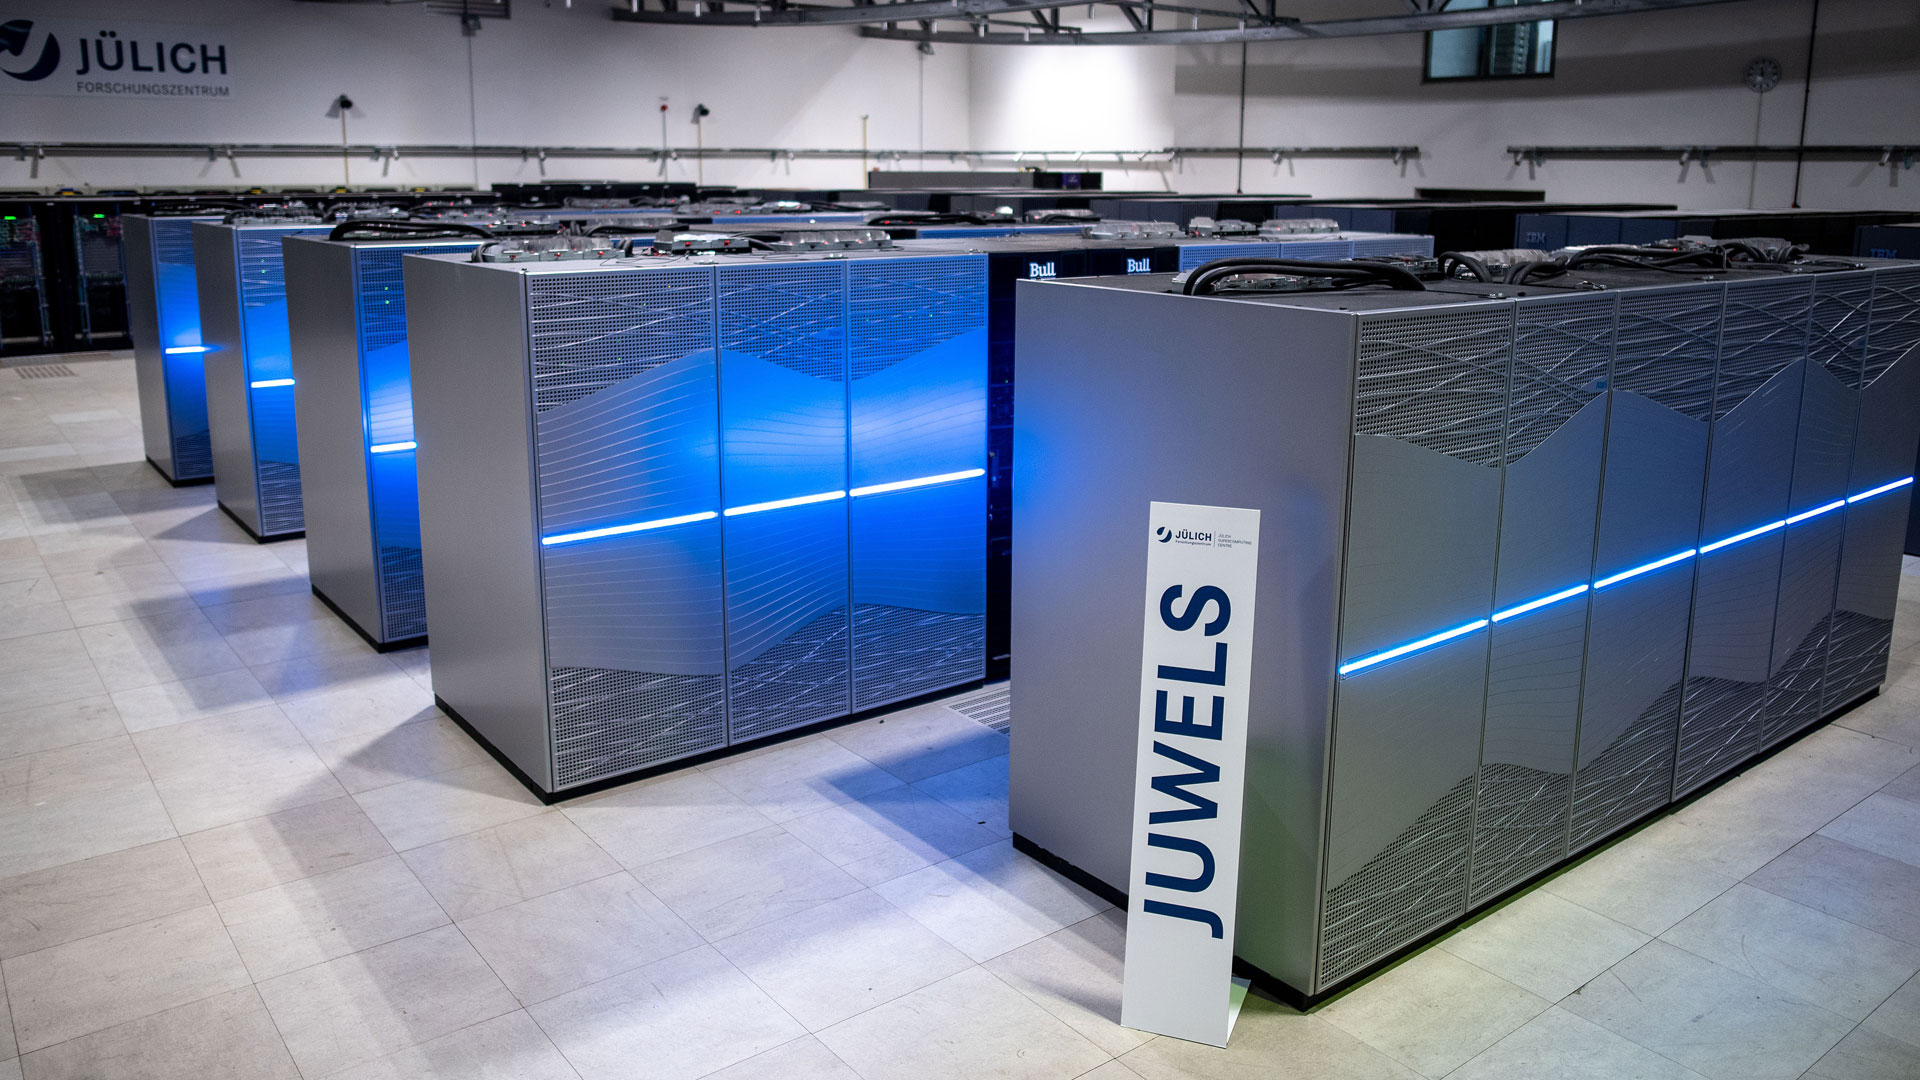 High-performance computers: Jupiter supercomputer comes to Julich